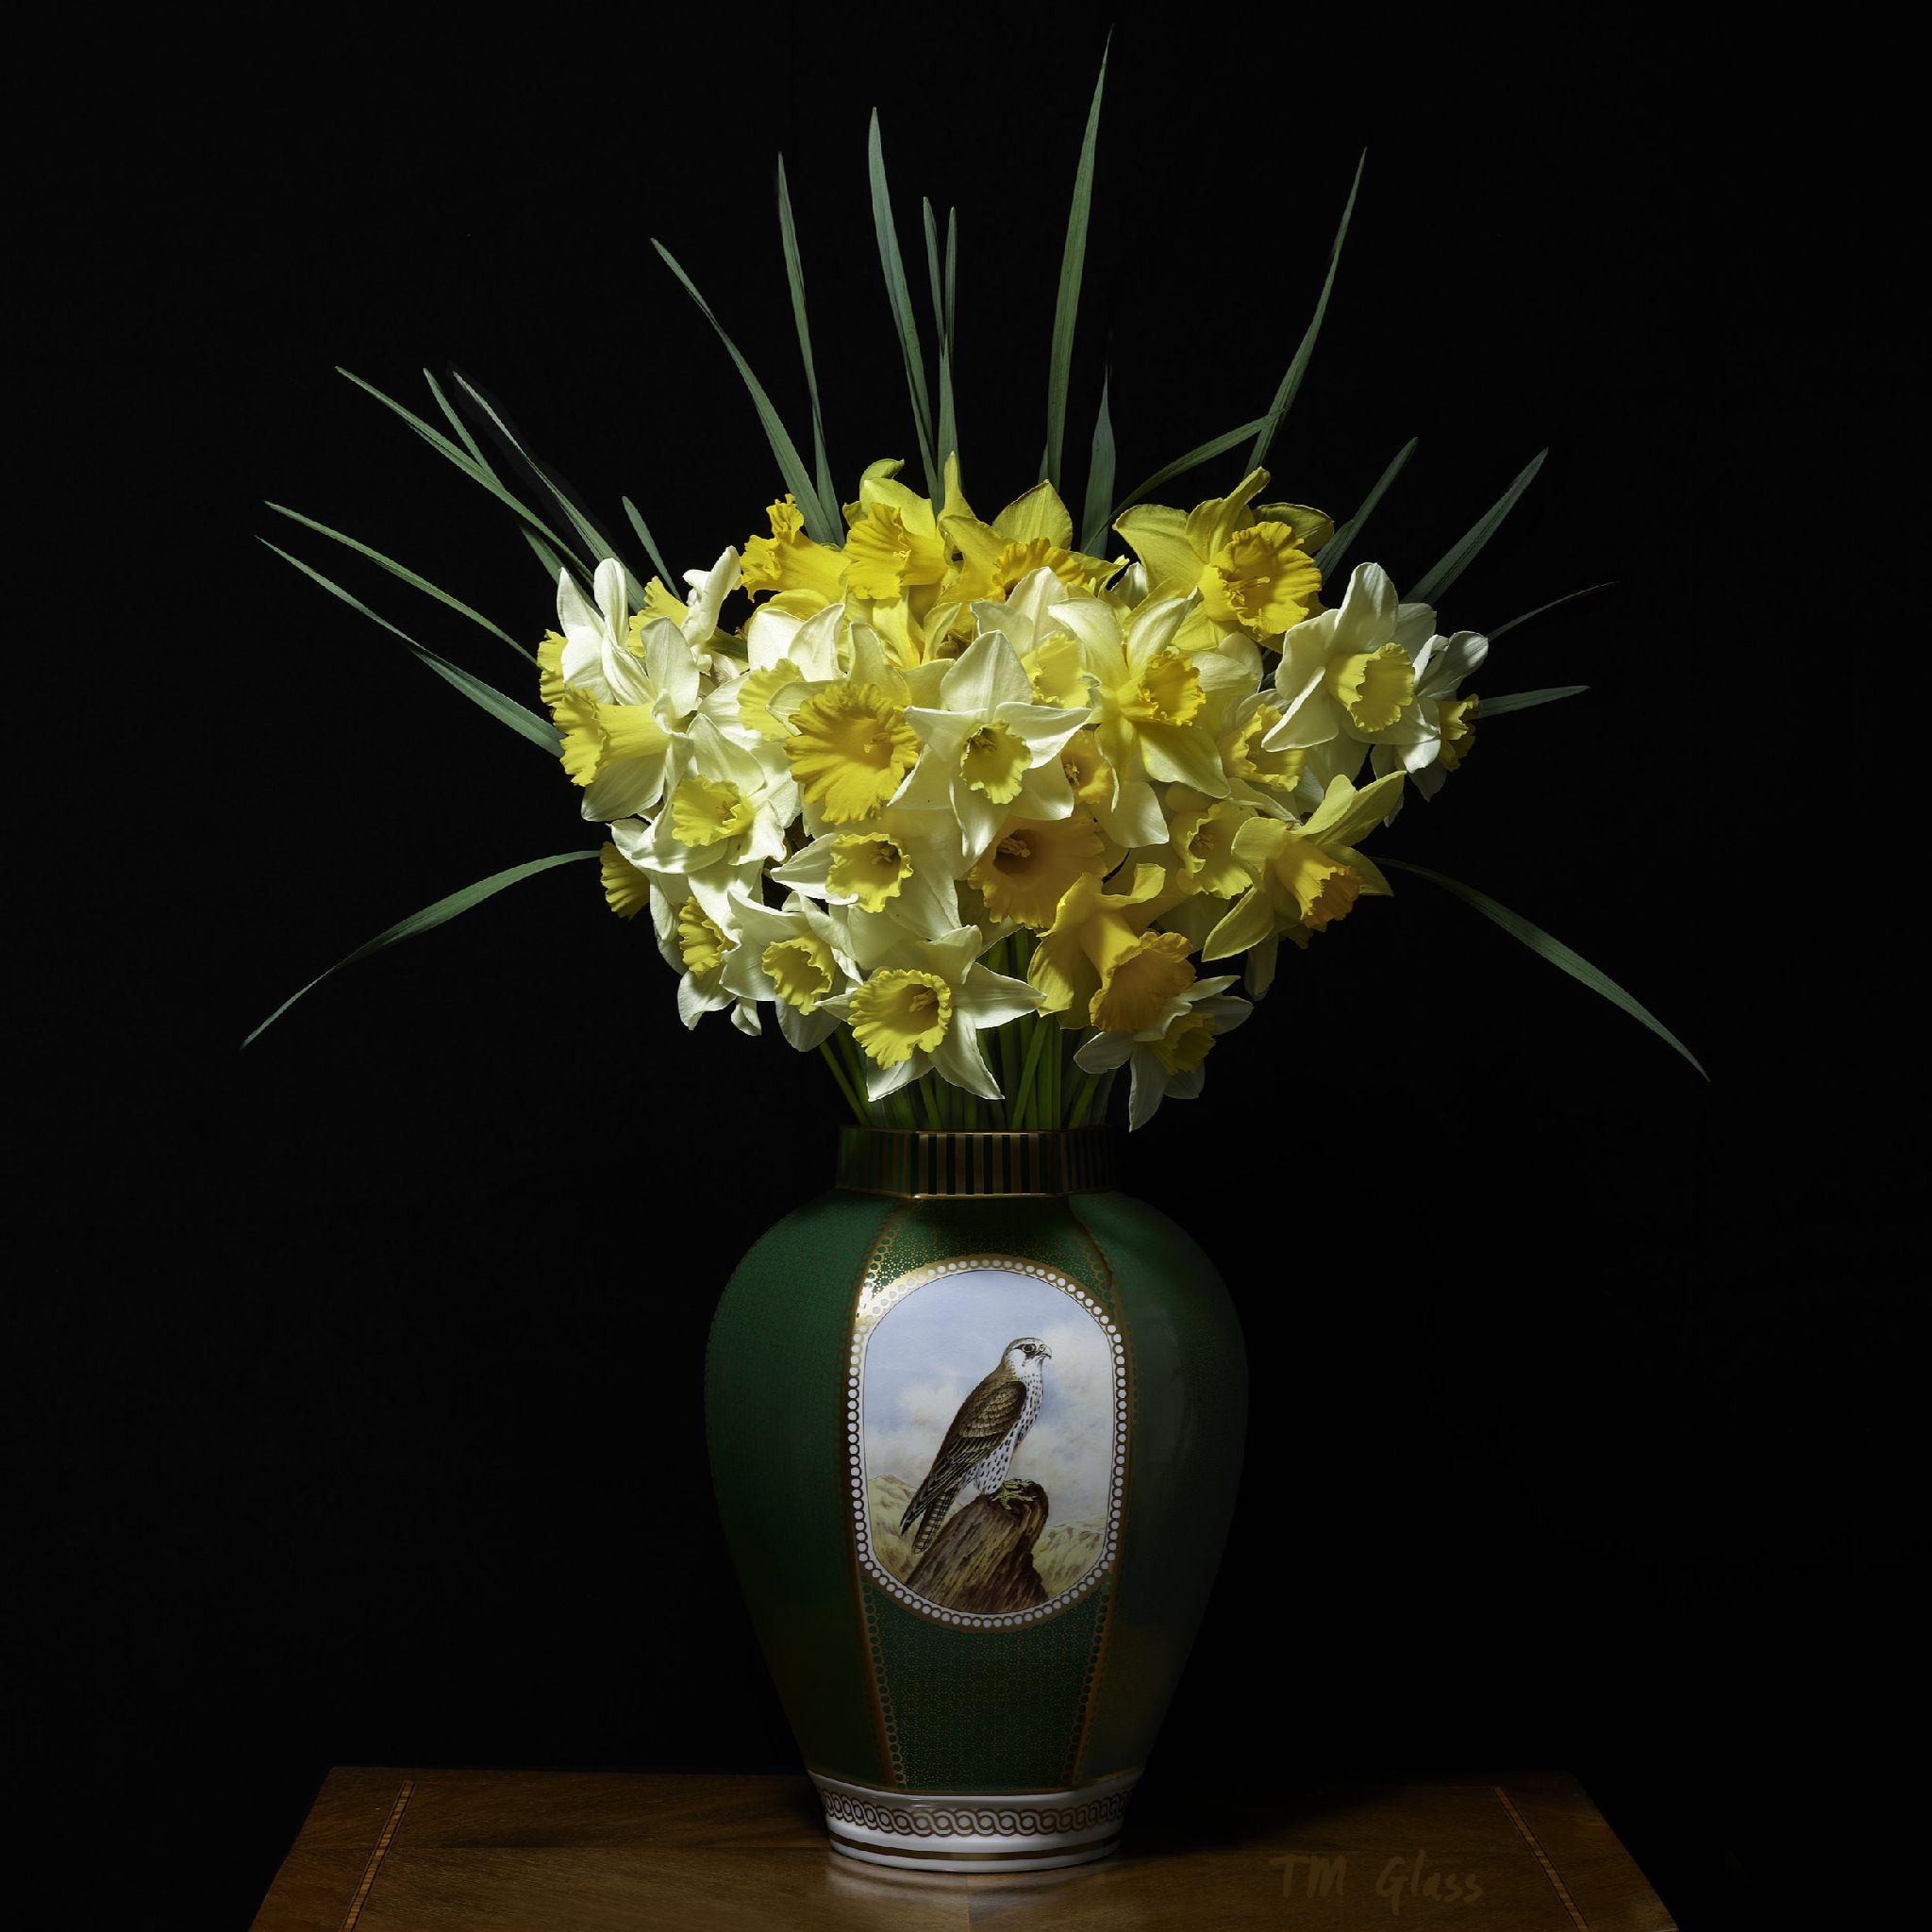 Narcissus in a Green Falcon Vessel - Photograph by T.M. Glass